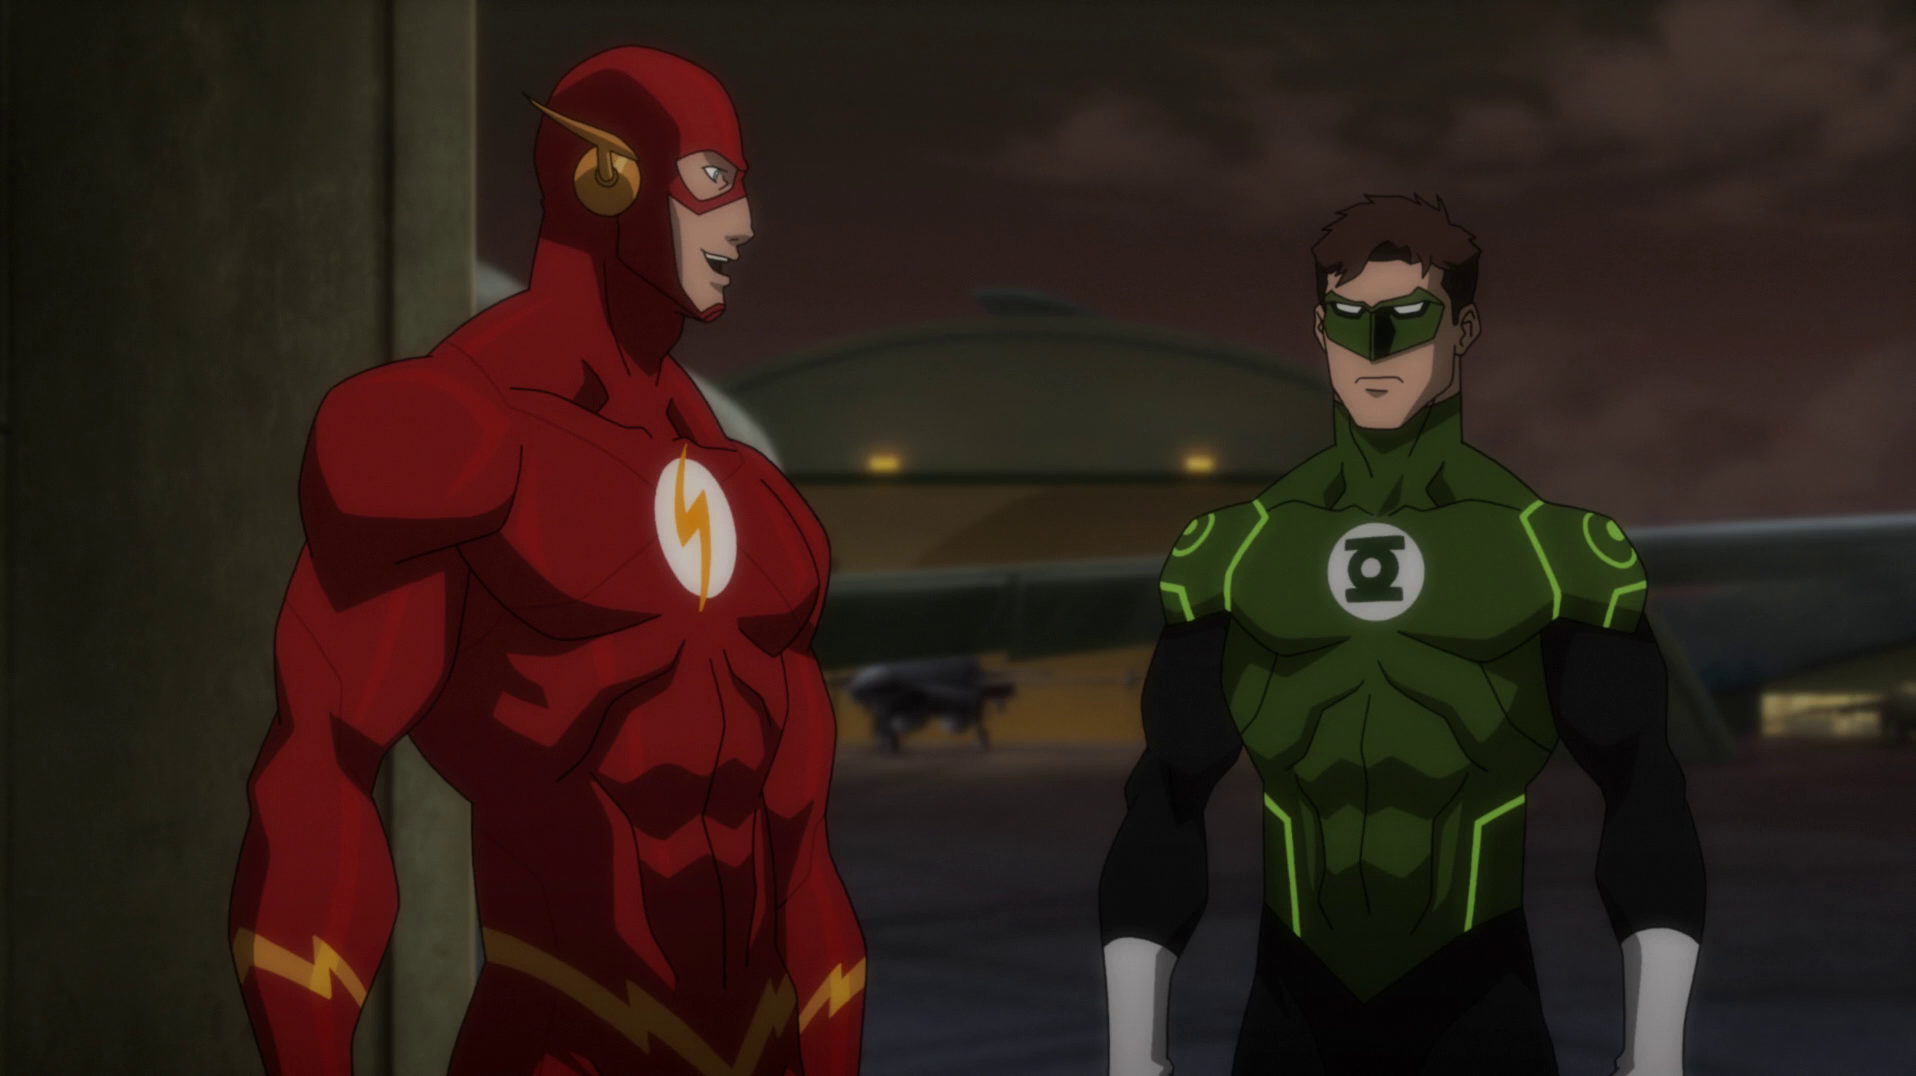 Continue below for an assortment of screengrabs from the Justice League: Th...